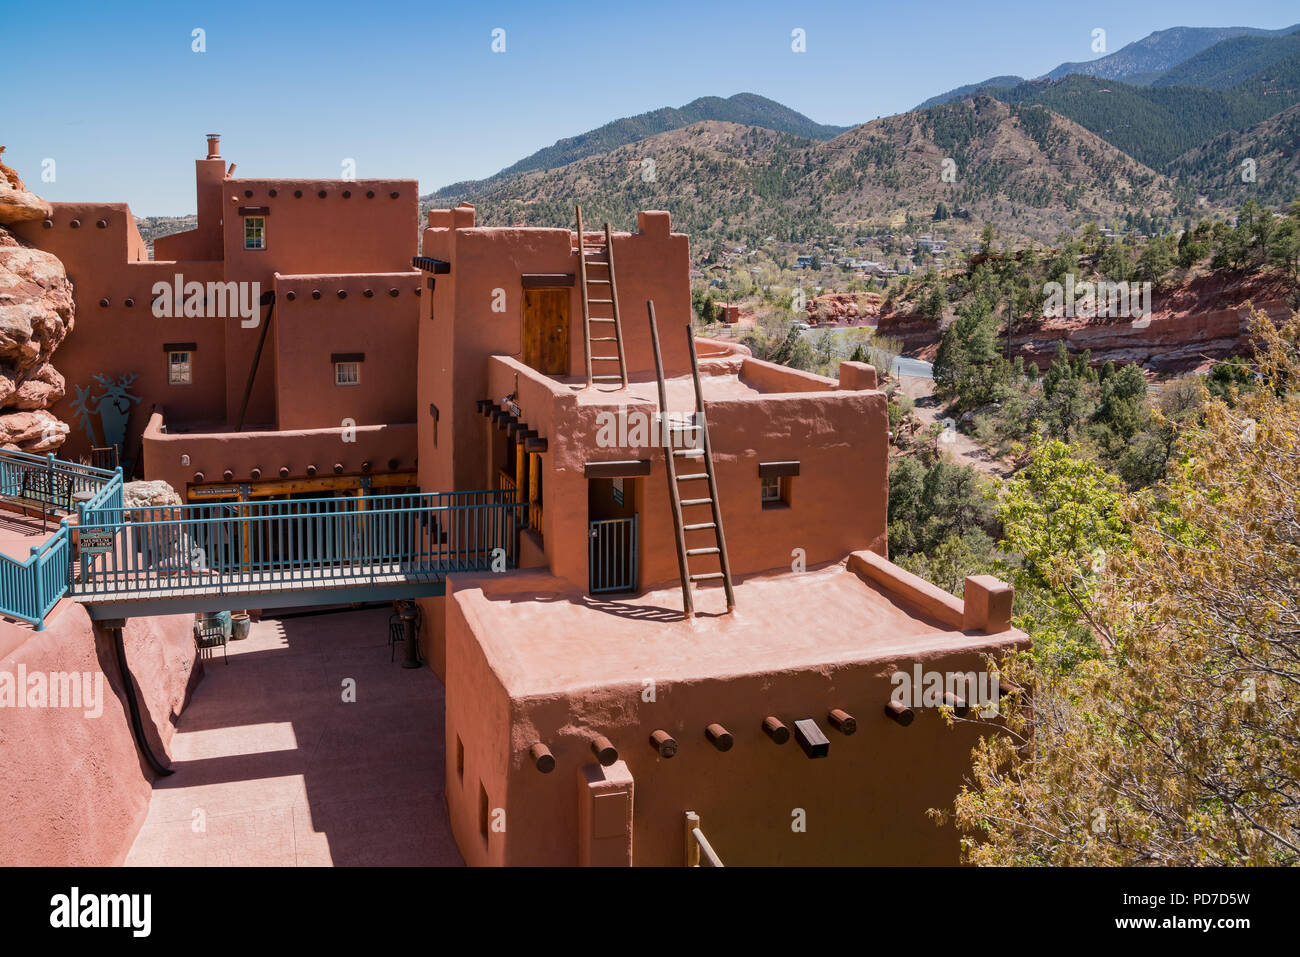 Manitou Springs, MAY 4: The special Manitou Cliff Dwellings museum on MAY 4, 2017 at Manitou Springs, Colorado Stock Photo